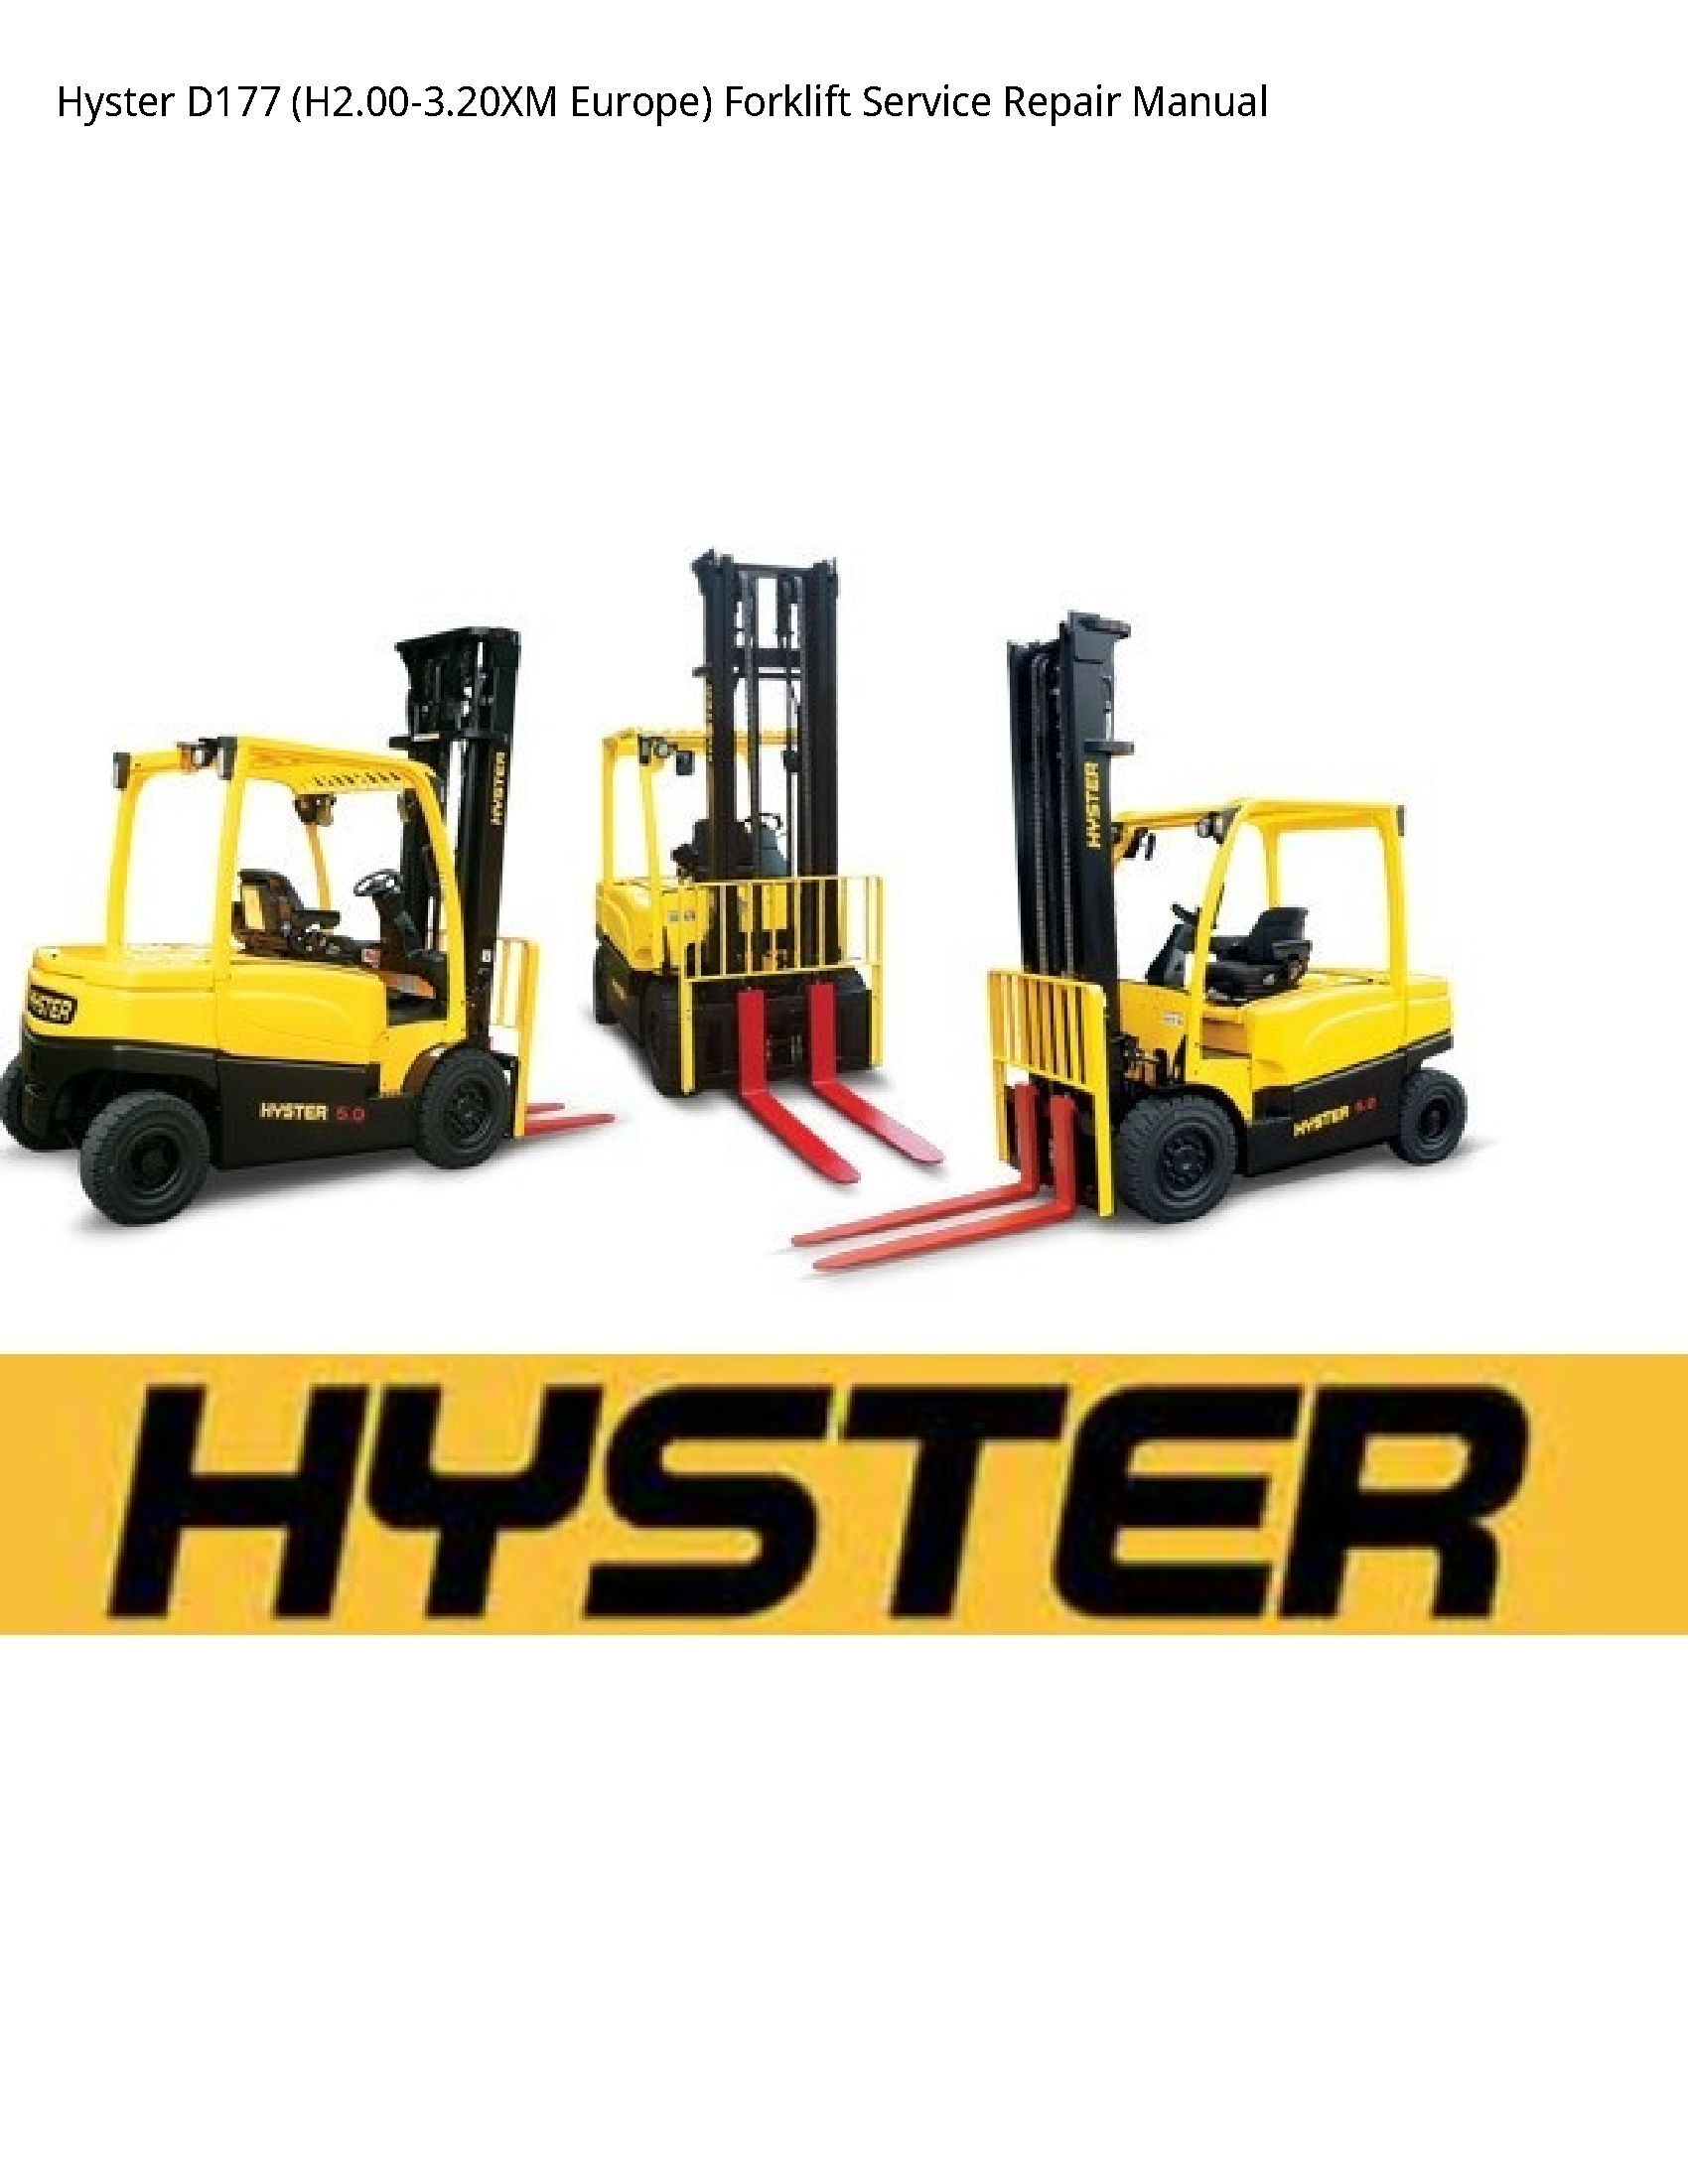 Hyster D177 Europe) Forklift manual